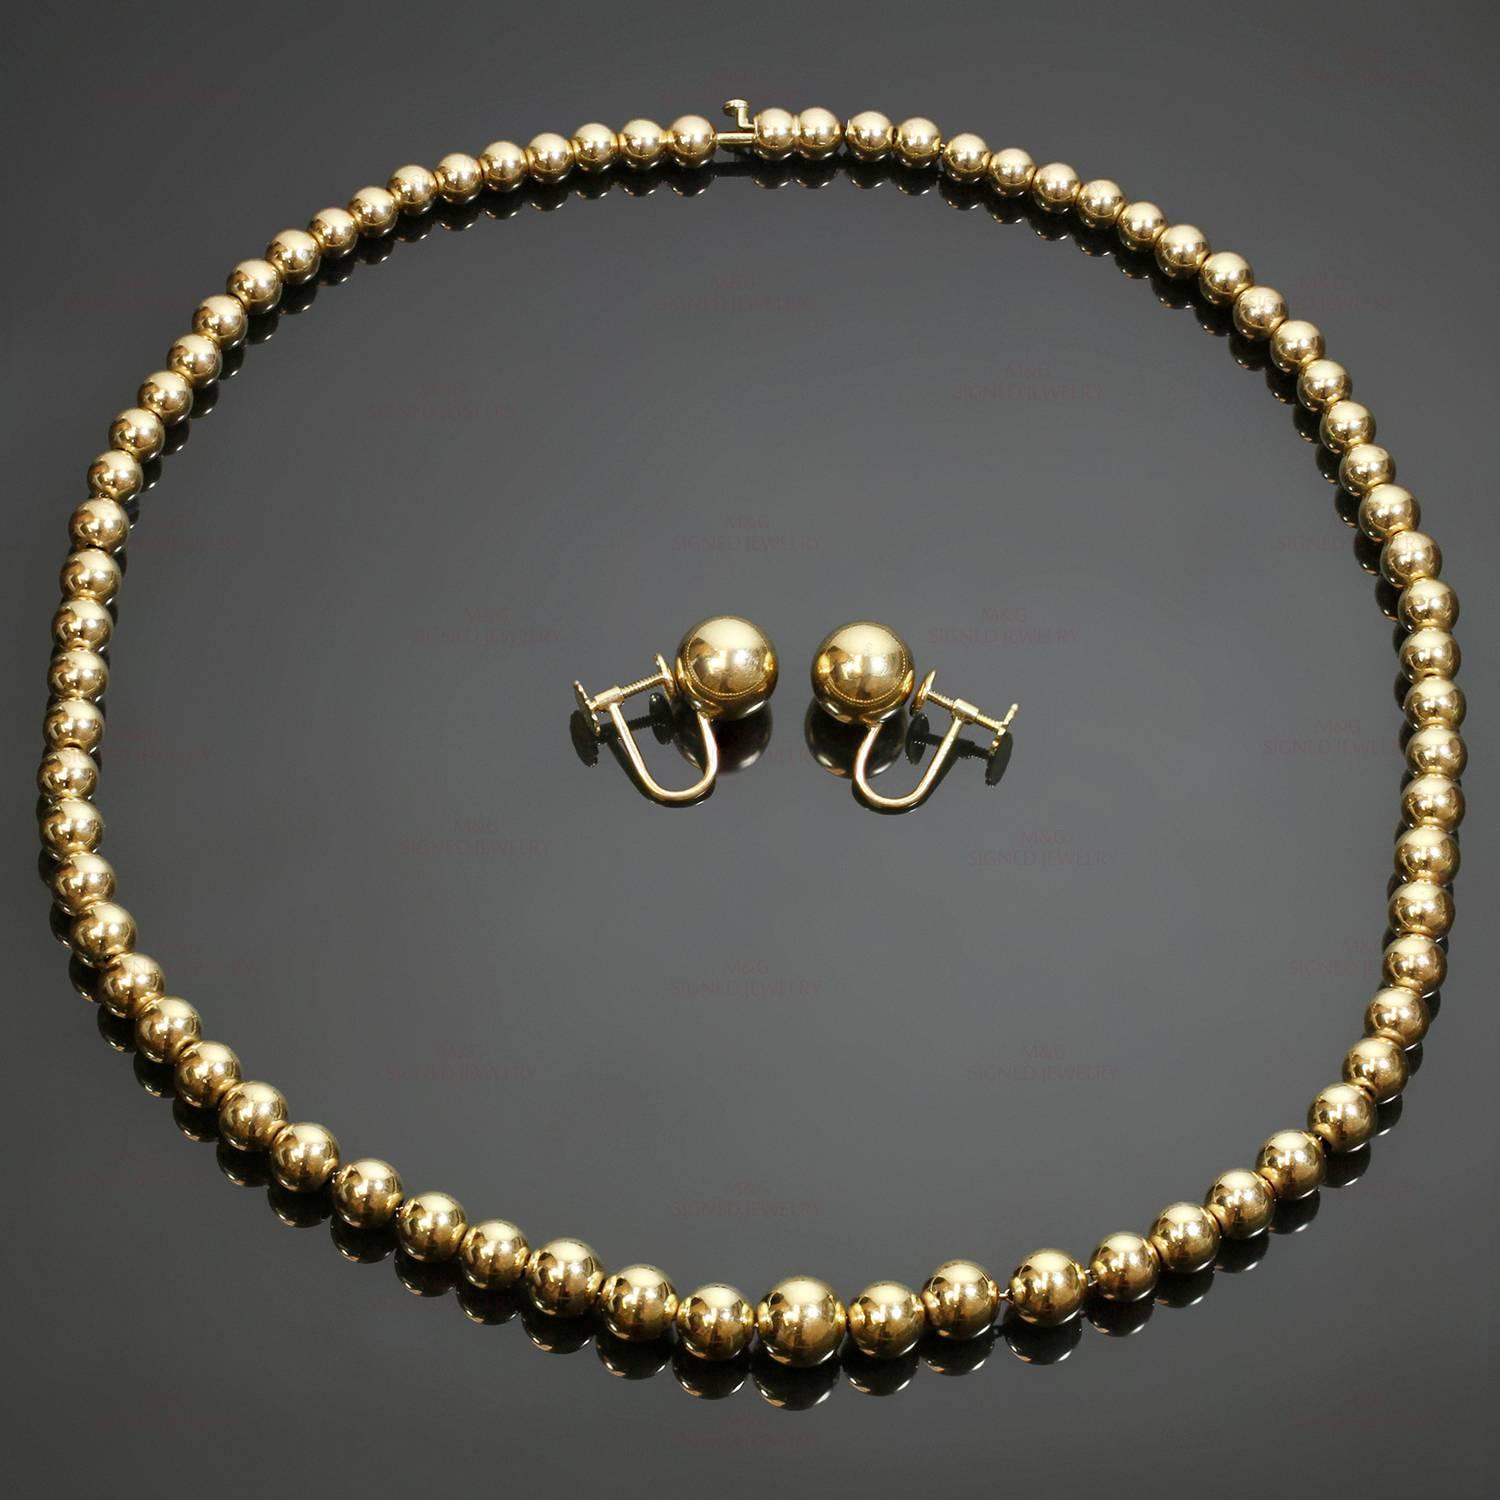 This vintage Tiffany & Co. consists of necklace and a matching pair of earrings featuring a classic bead design crafted in 14k yellow gold. Made in United States circa 1980s. Measurements: 0.38